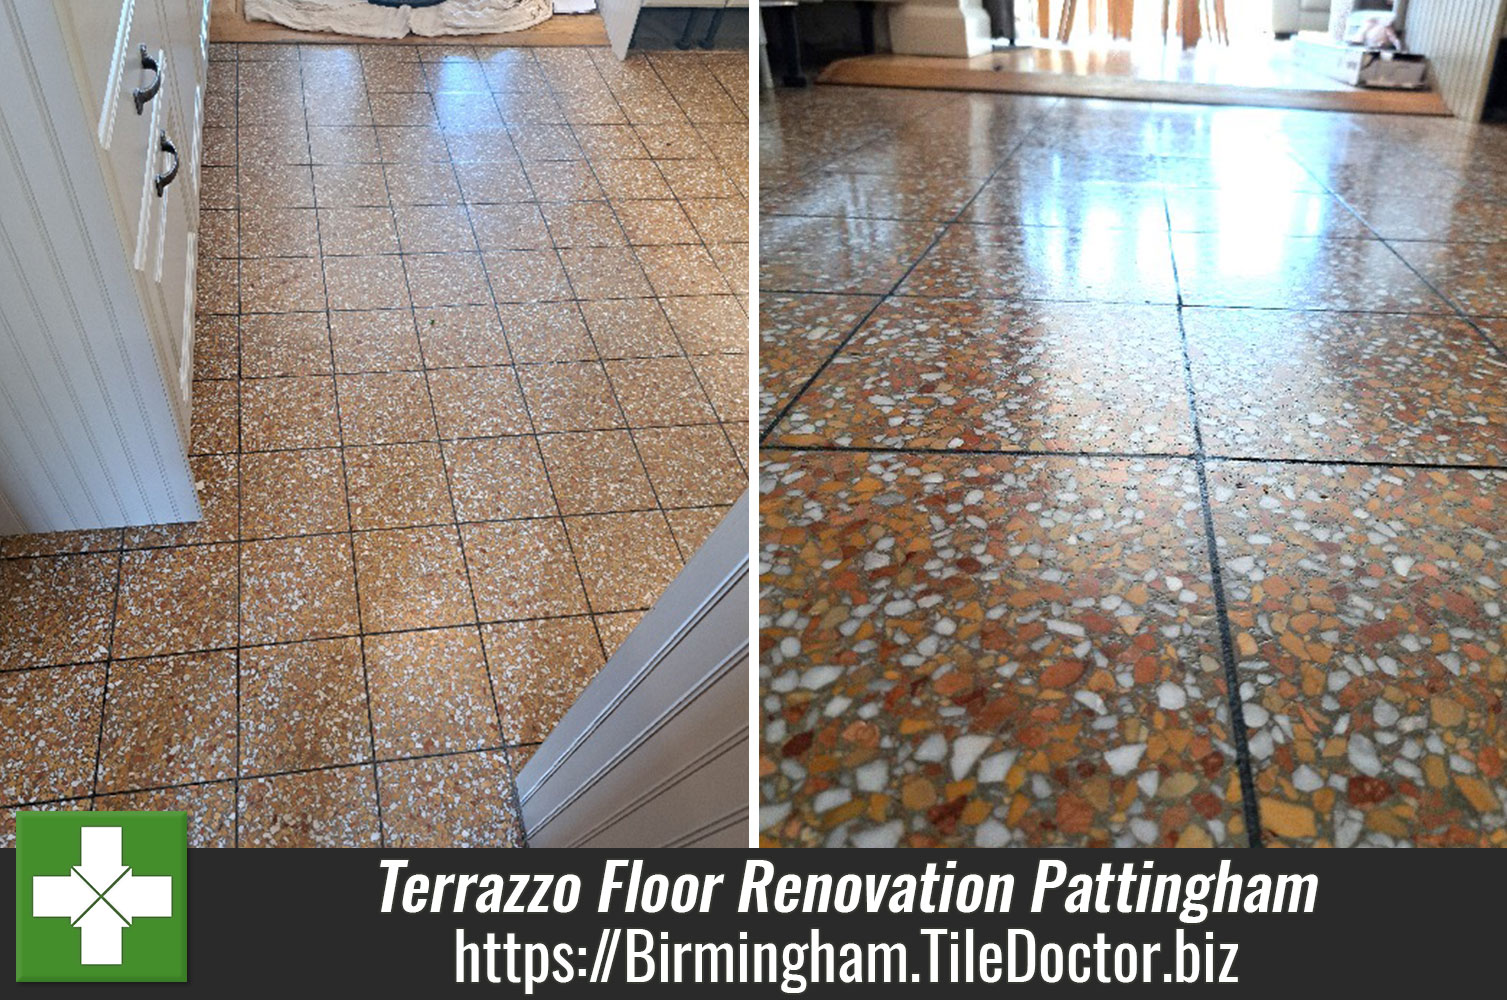 Restoring the Appearance of Terrazzo Tiled Flooring with Tile Doctor Burnishing Pads in Wolverhampton